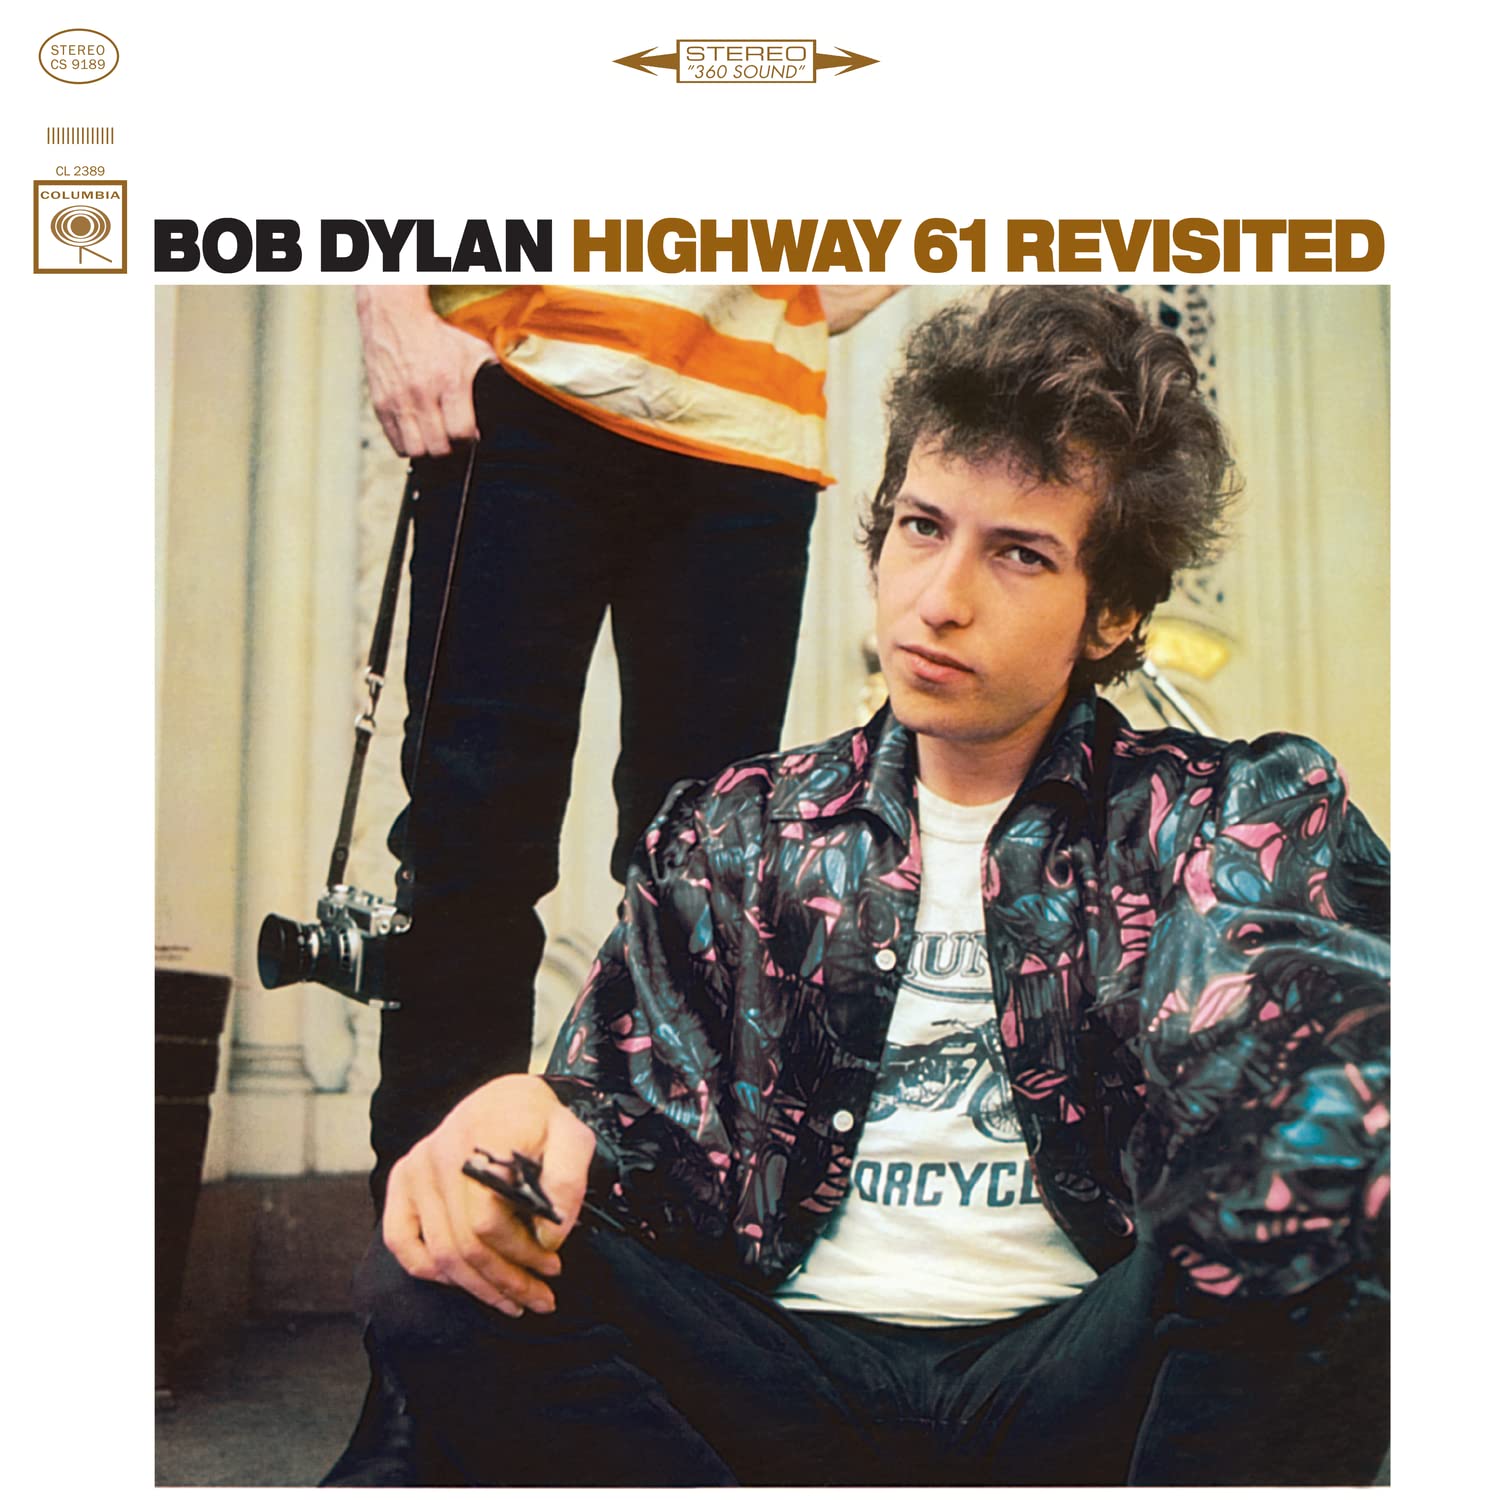 Highway 83 Revisited: Bob Dylan's Journey Through Time